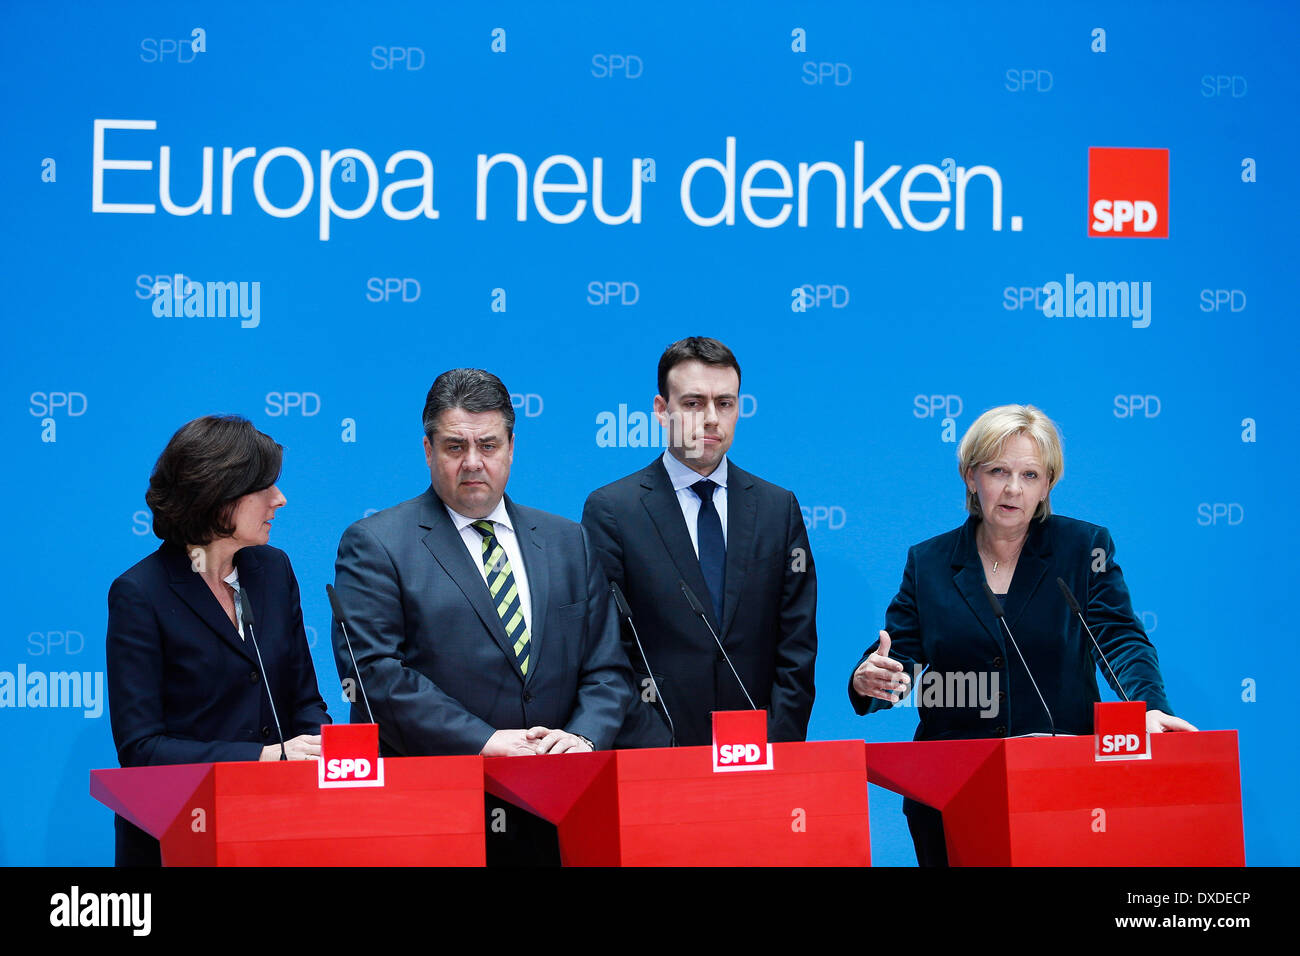 Berlin, Germany. 24th Mar, 2014. Statement on energy policy with Sigmar Gabriel, SPD Chief and Miniter of Economy, and Hannelore Kraft, Minister-President of North Rhine-Westphalia, and Malu Dreyer, Minister-President of Rhineland-Palatinate, and the Deputy Prime Minister of Baden-WÃƒÂ¼rttemberg Nils Schmid at Willy-Brandt-Haus in Berlin./Picture: Sigmar Gabriel, SPD Chief and Miniter of Economy, and Hannelore Kraft, Minister-President of North Rhine-Westphalia, and Malu Dreyer, Minister-President of Rhineland-Palatinate, and the Deputy Prime Minister of Baden-WÃƒÂ¼rttemberg Nils Schmid. ( Stock Photo